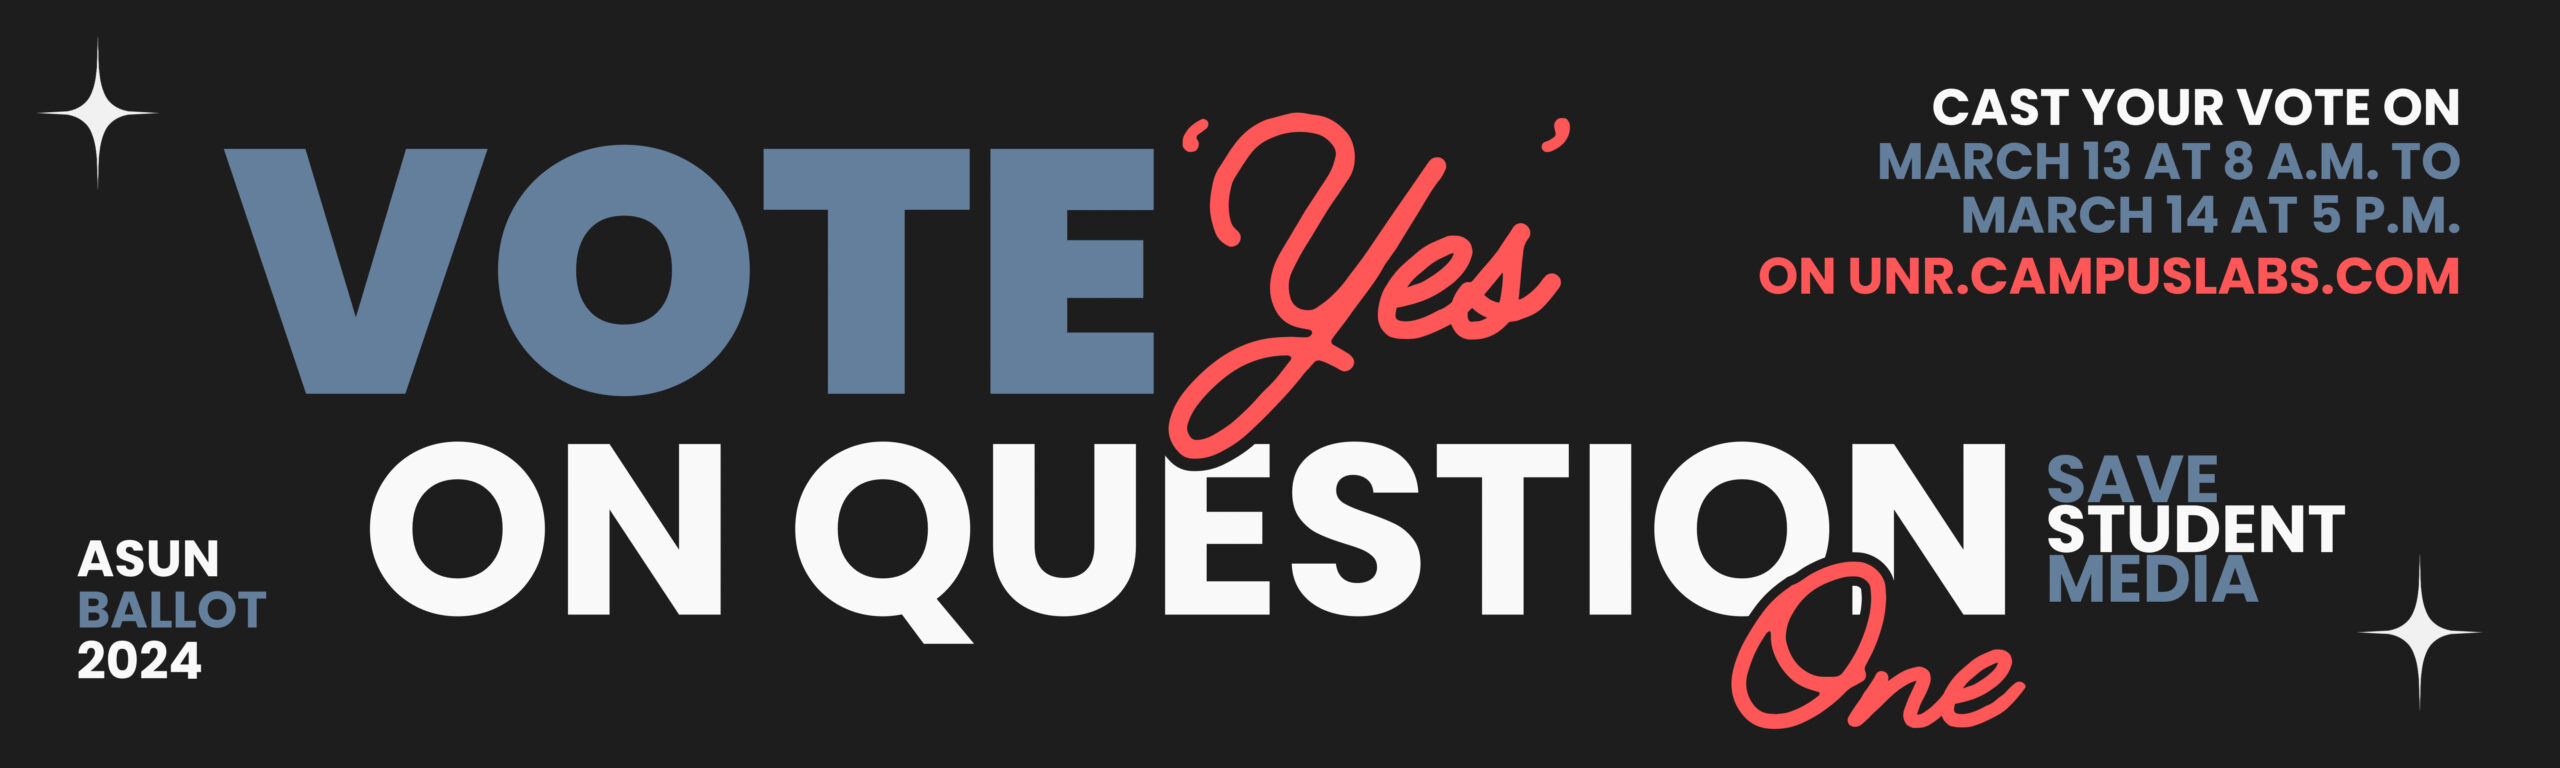 Vote Yes on Question 1. Save Student Media. Cast your vote on March 13 at 8AM to March 14 at 5PM on UNR.CAMPUSLABS.COM